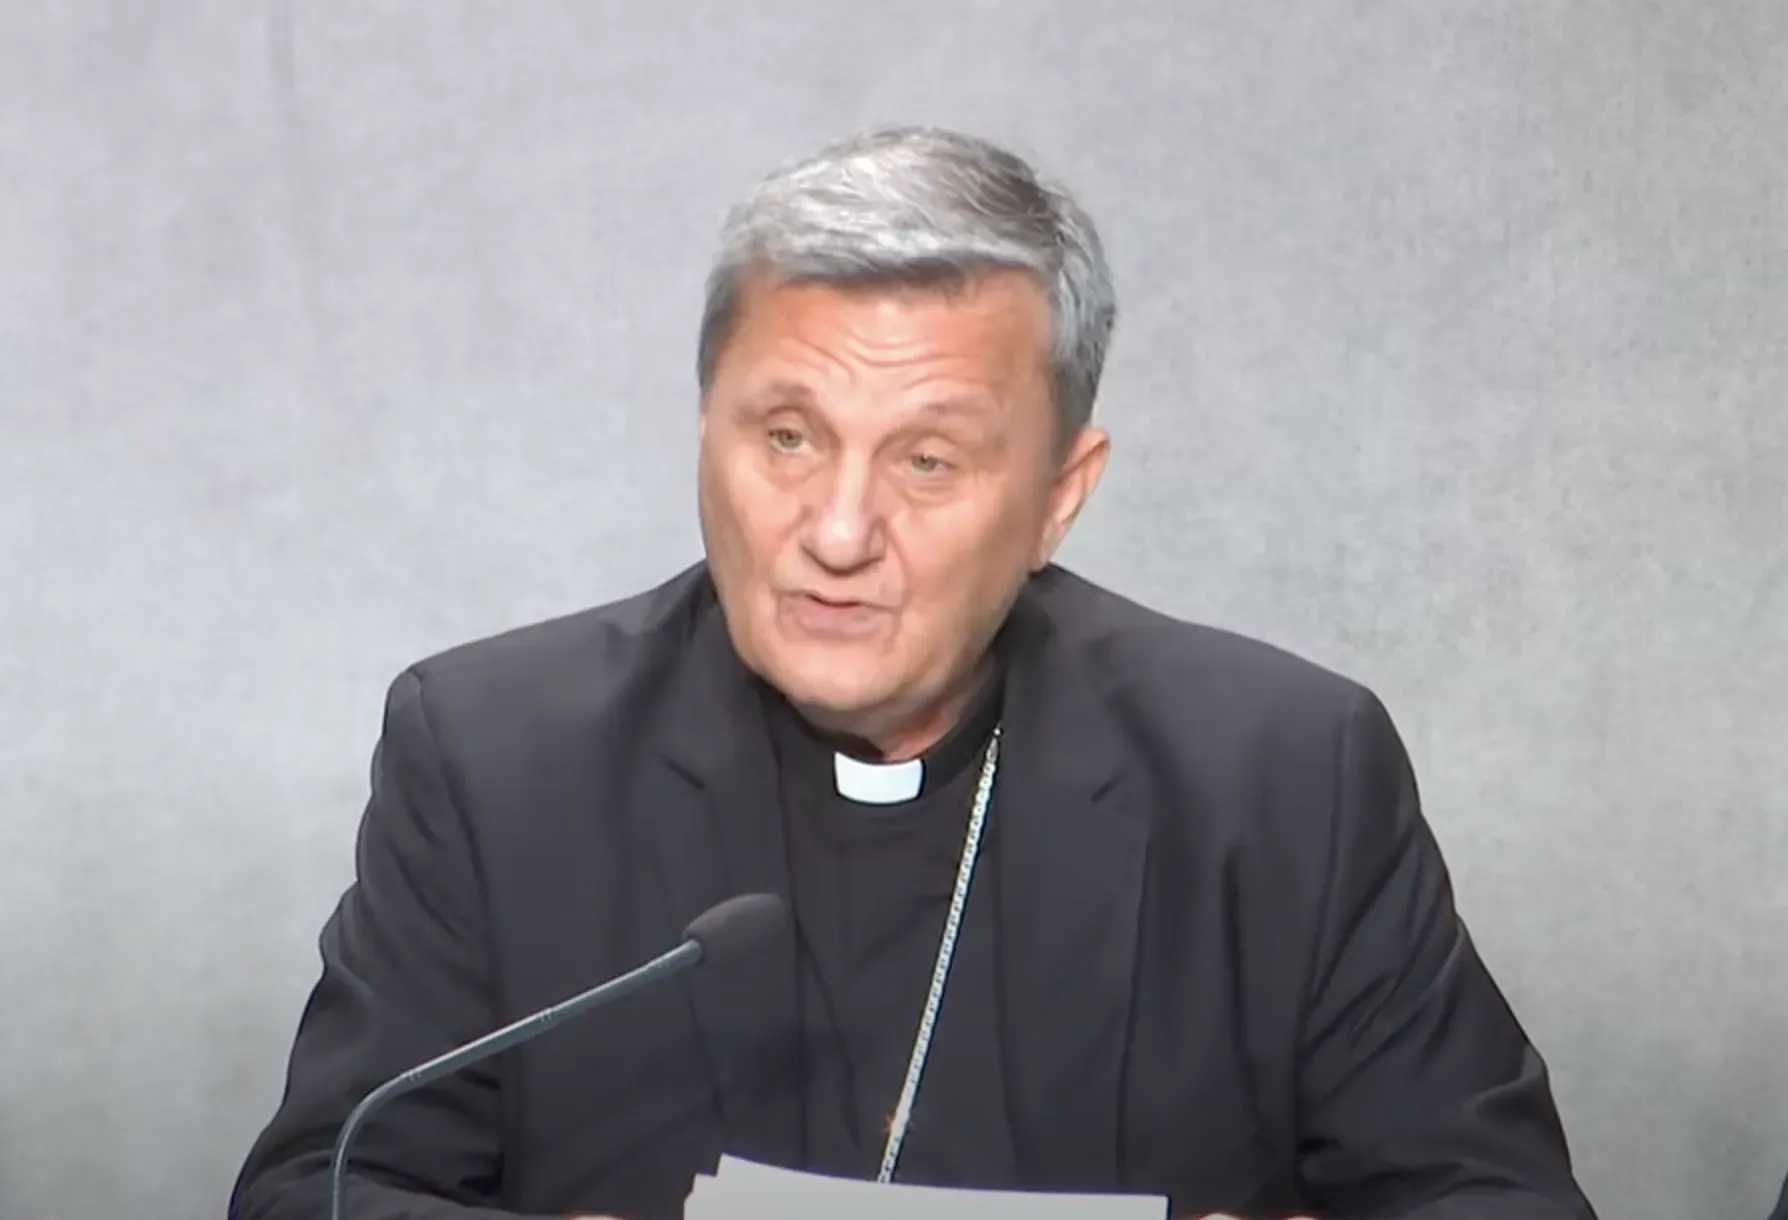 Cardinal Mario Grech speaking at the press conference in the Vatican on Aug. 26, 2022. Vatican Media / YouTube Channel